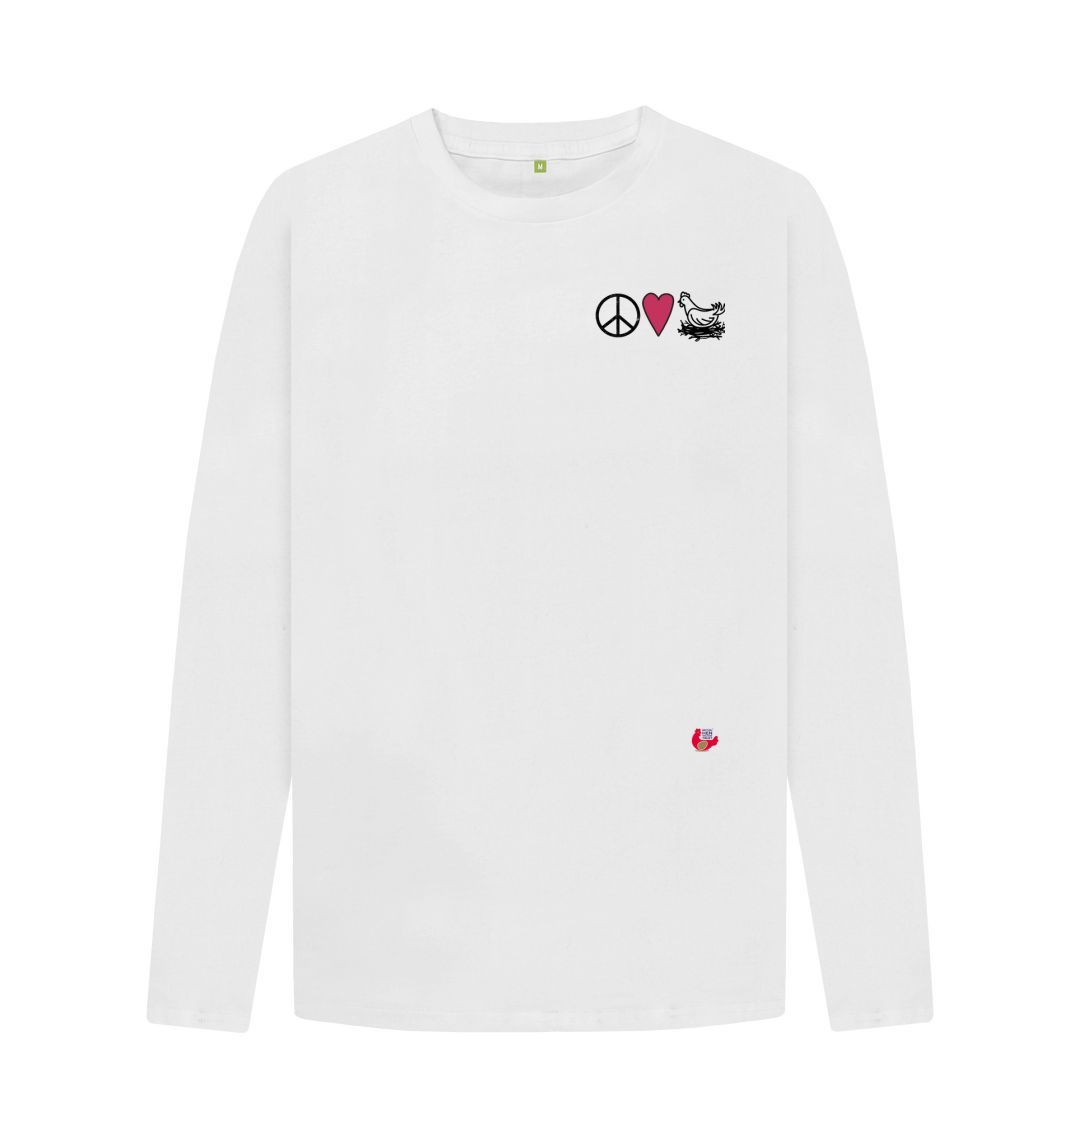 White Men's Long Sleeve T-Shirt - Peace, Love & Chickens - Small Logo